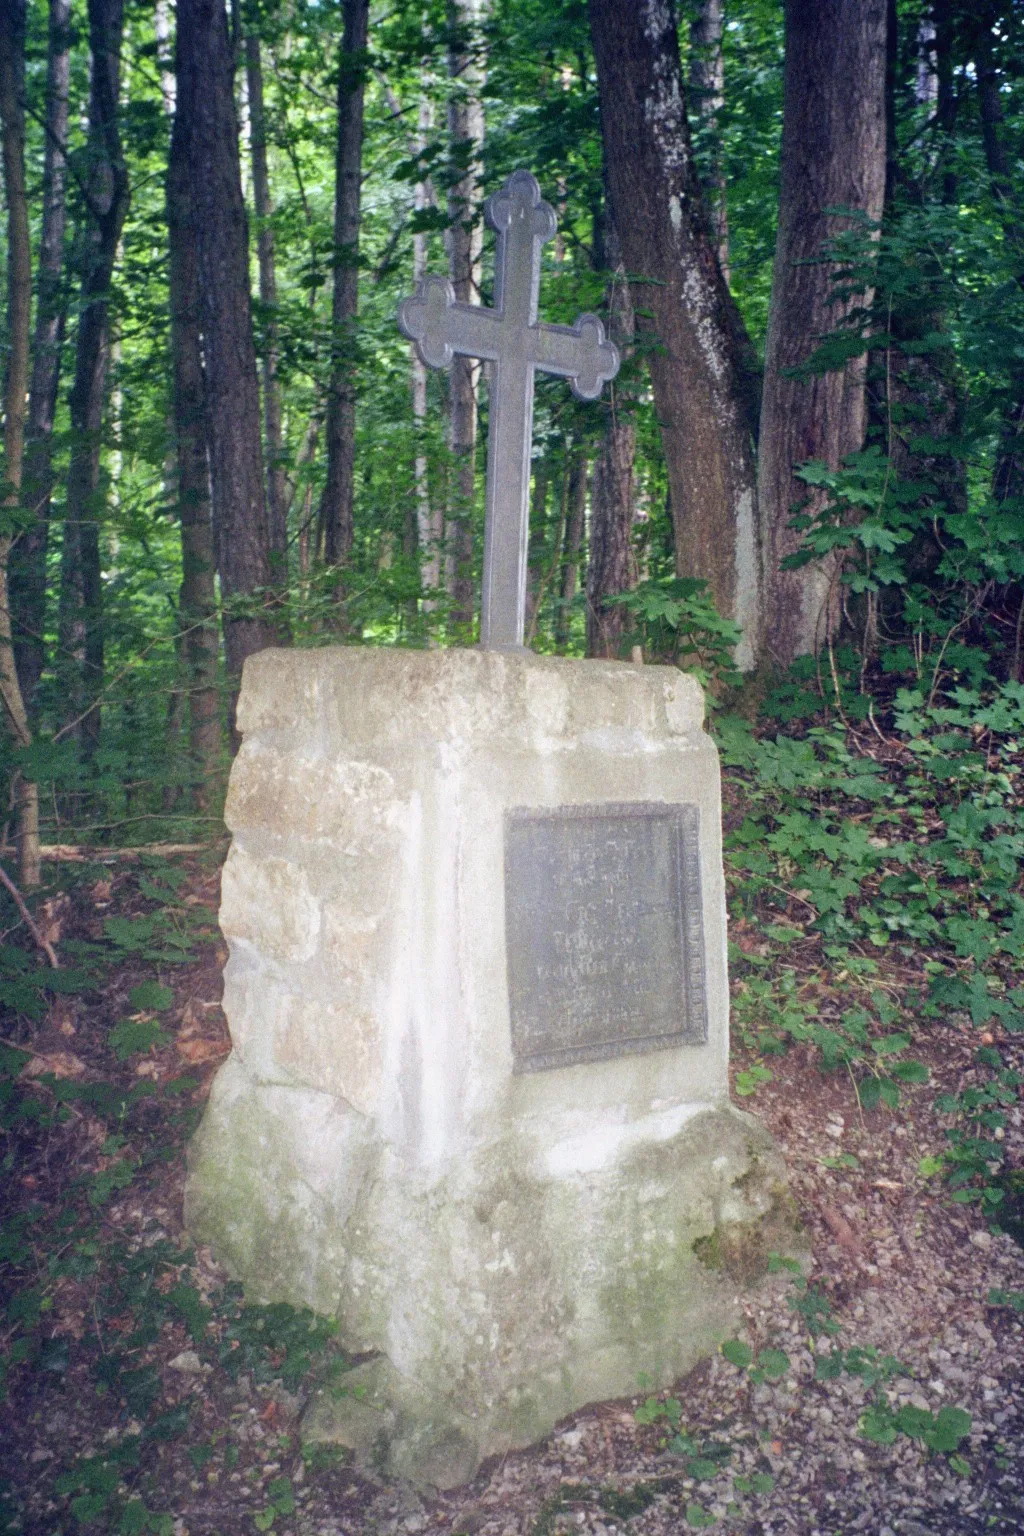 Photo showing: Monument for Major Ysenburg, who died in the "Deutscher Krieg" in the battle of Bad Kissingen. The monument is located in Bad Kissingen near the Stations of the Cross at the "Stationsberg".